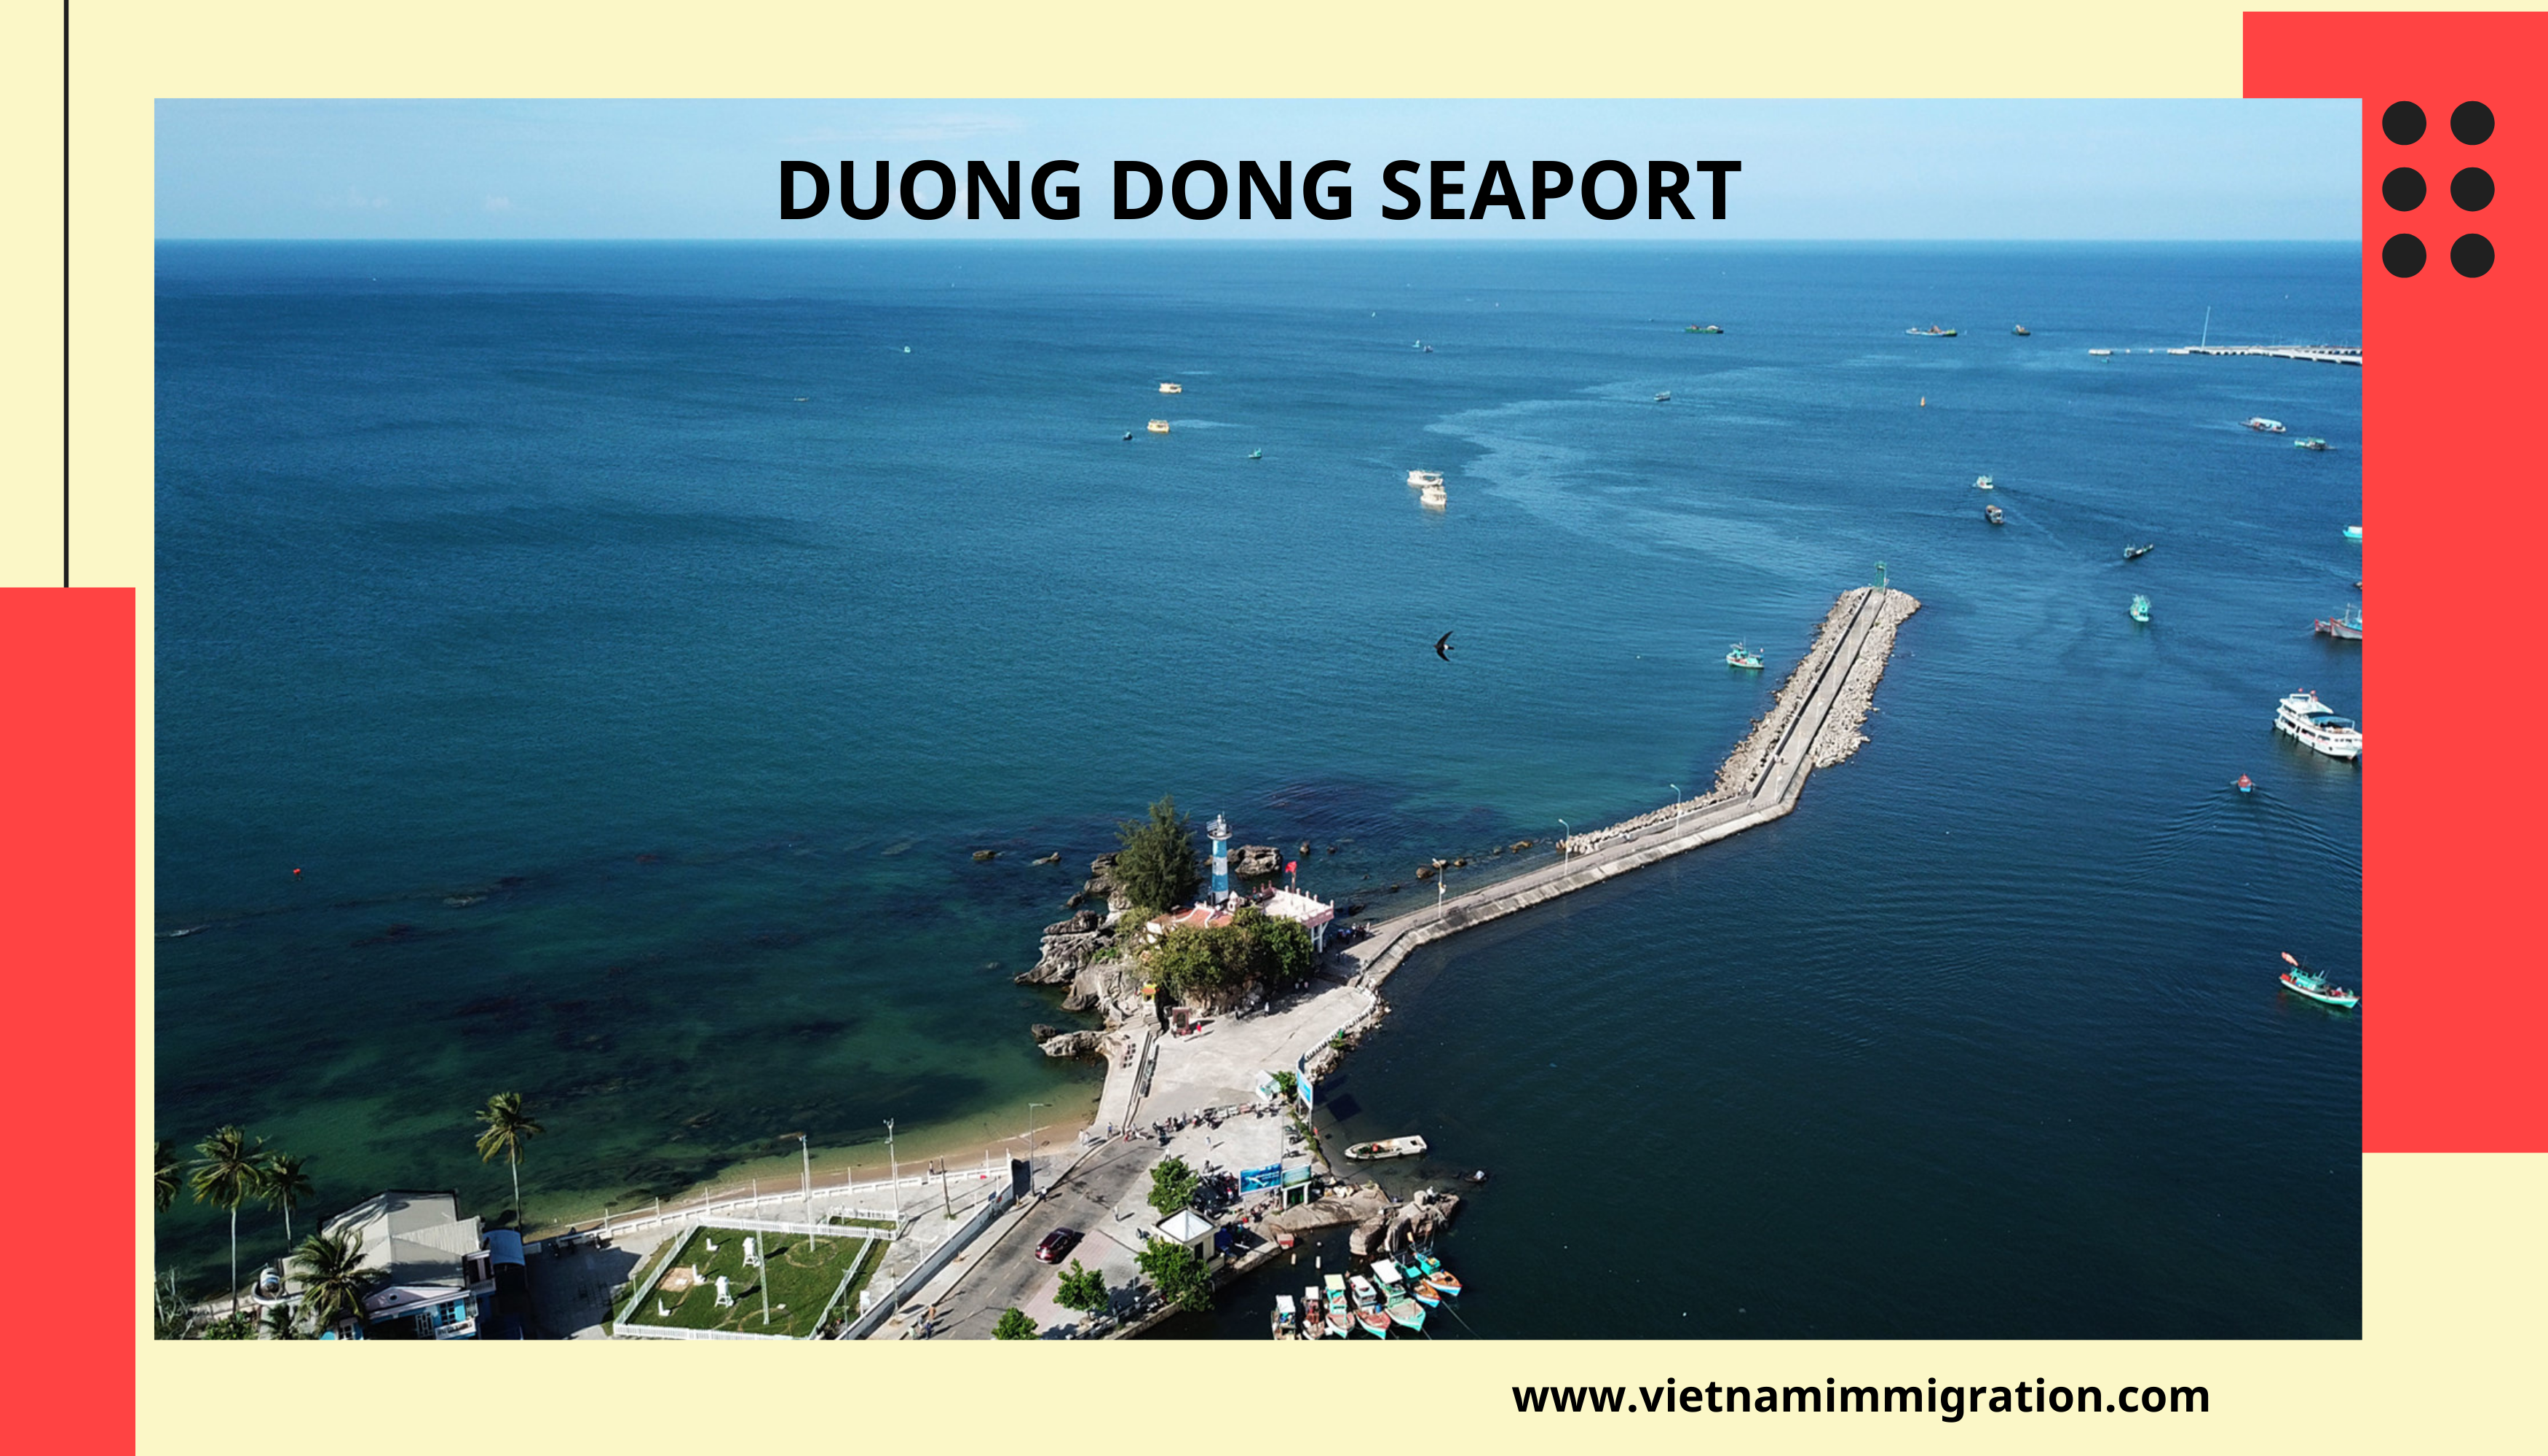 How to Apply for Vietnam E-Visa for Cruise Ships to Enter Duong Dong Seaport 2024